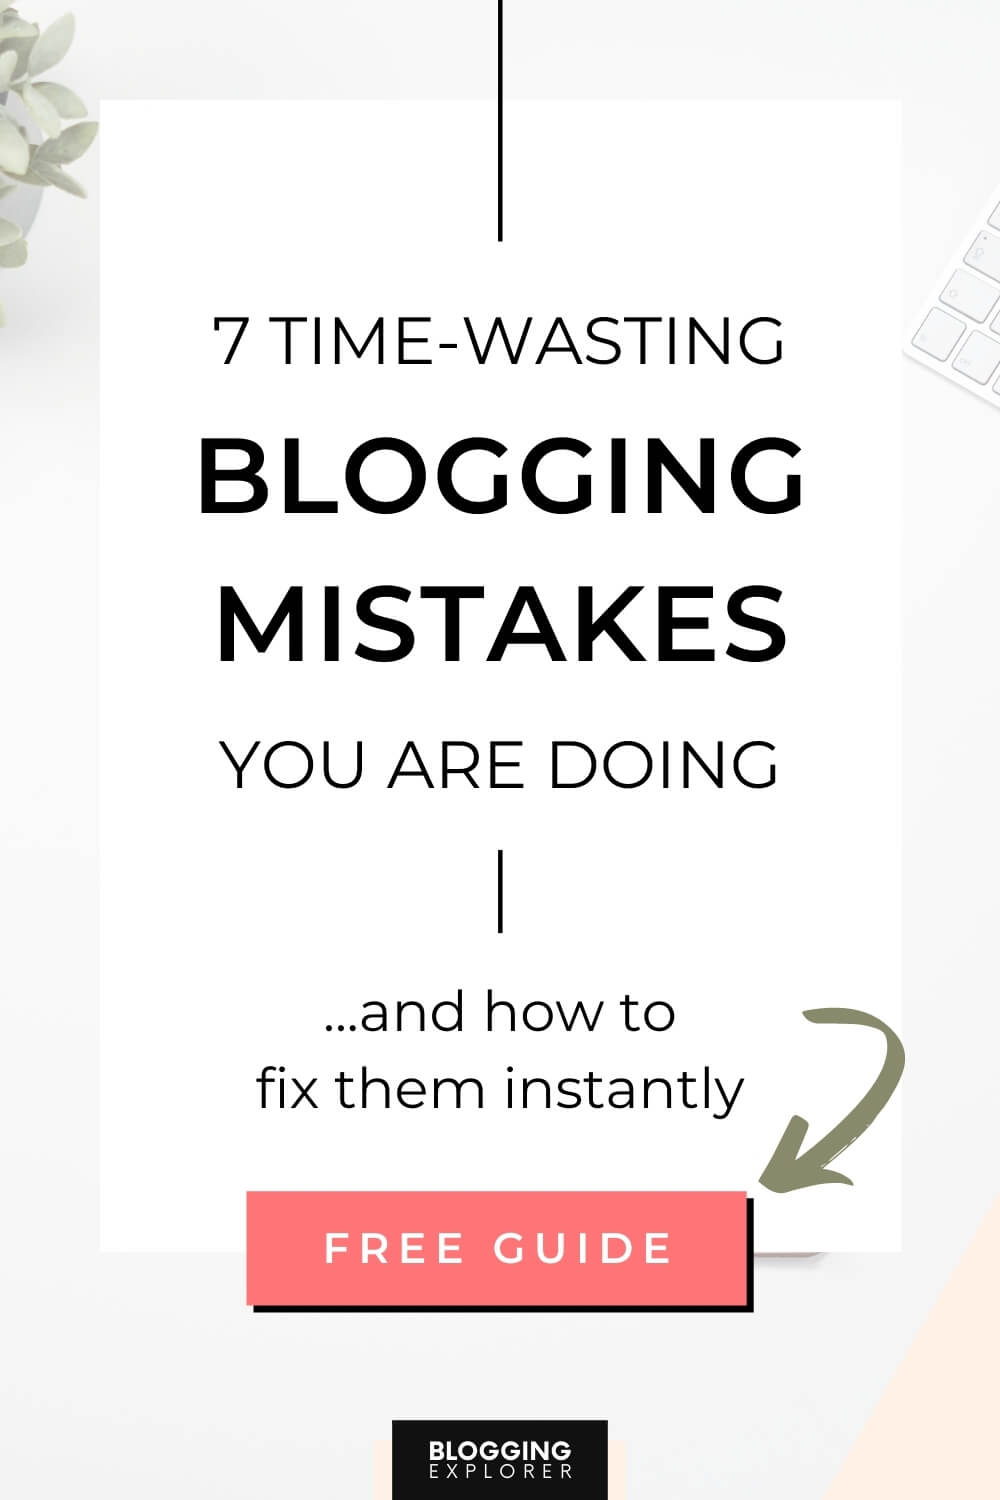 6 Worst Blogging Mistakes (And How to Avoid Them)